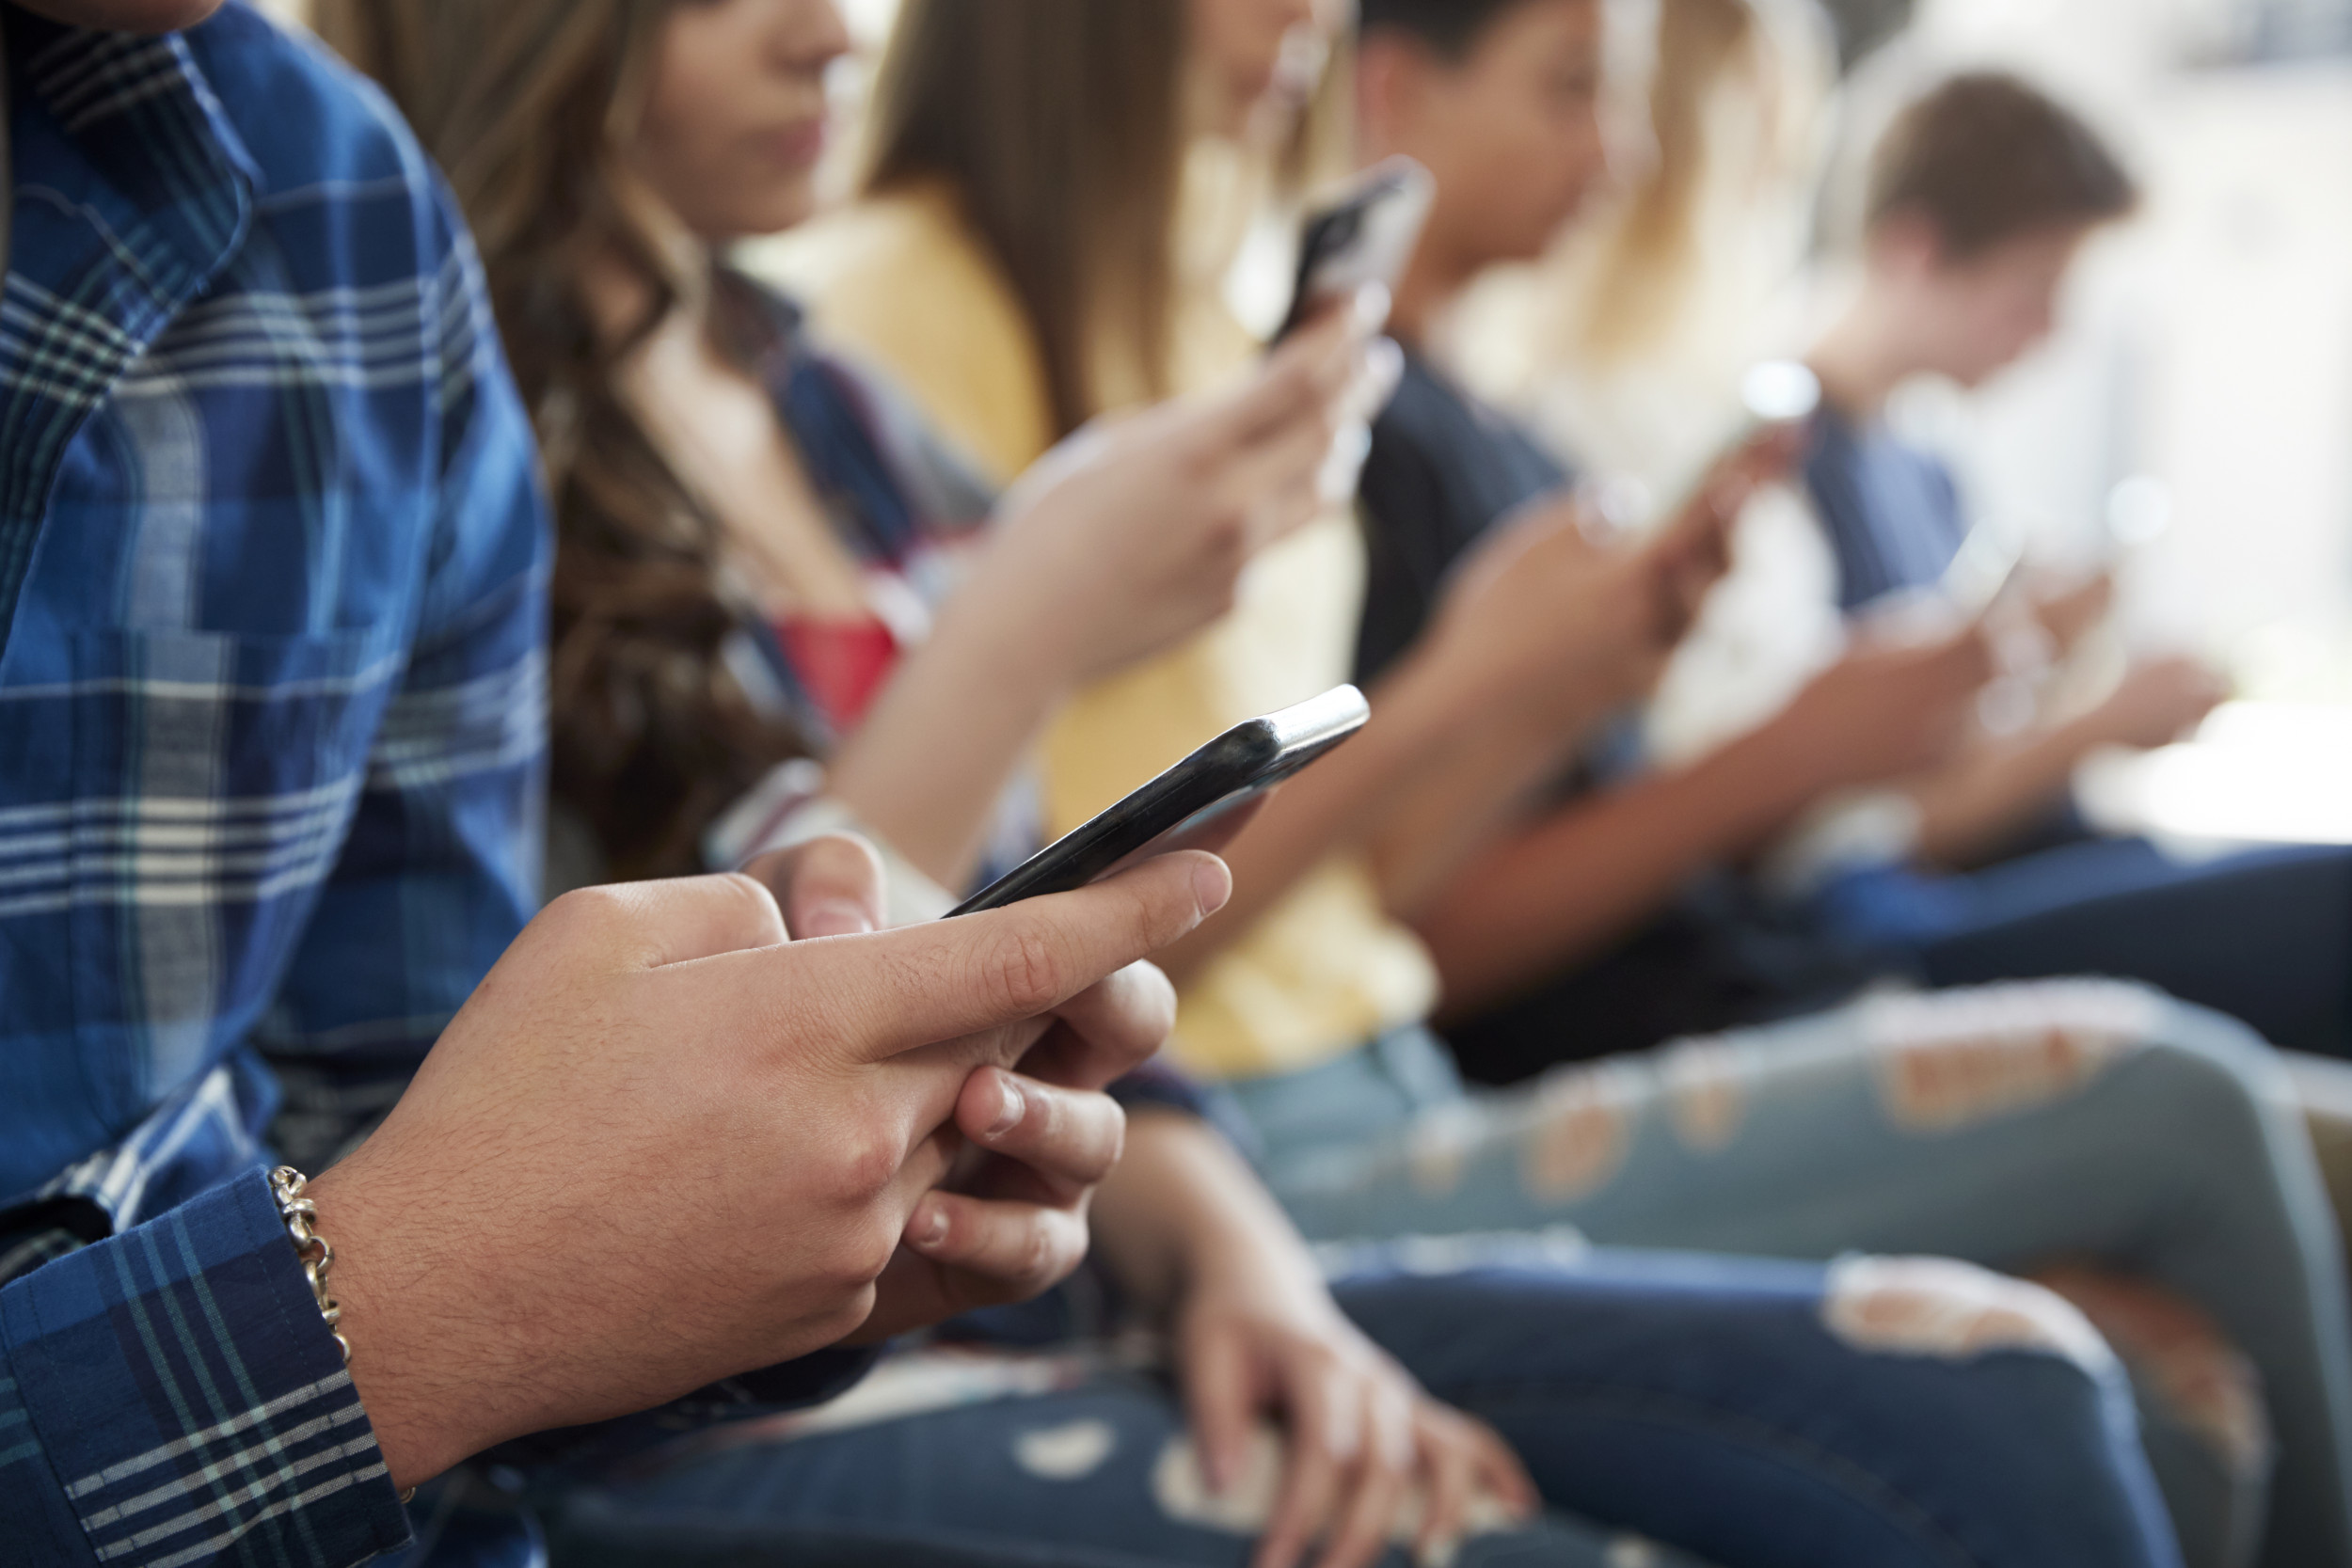 high school students walk out over cellphone ban